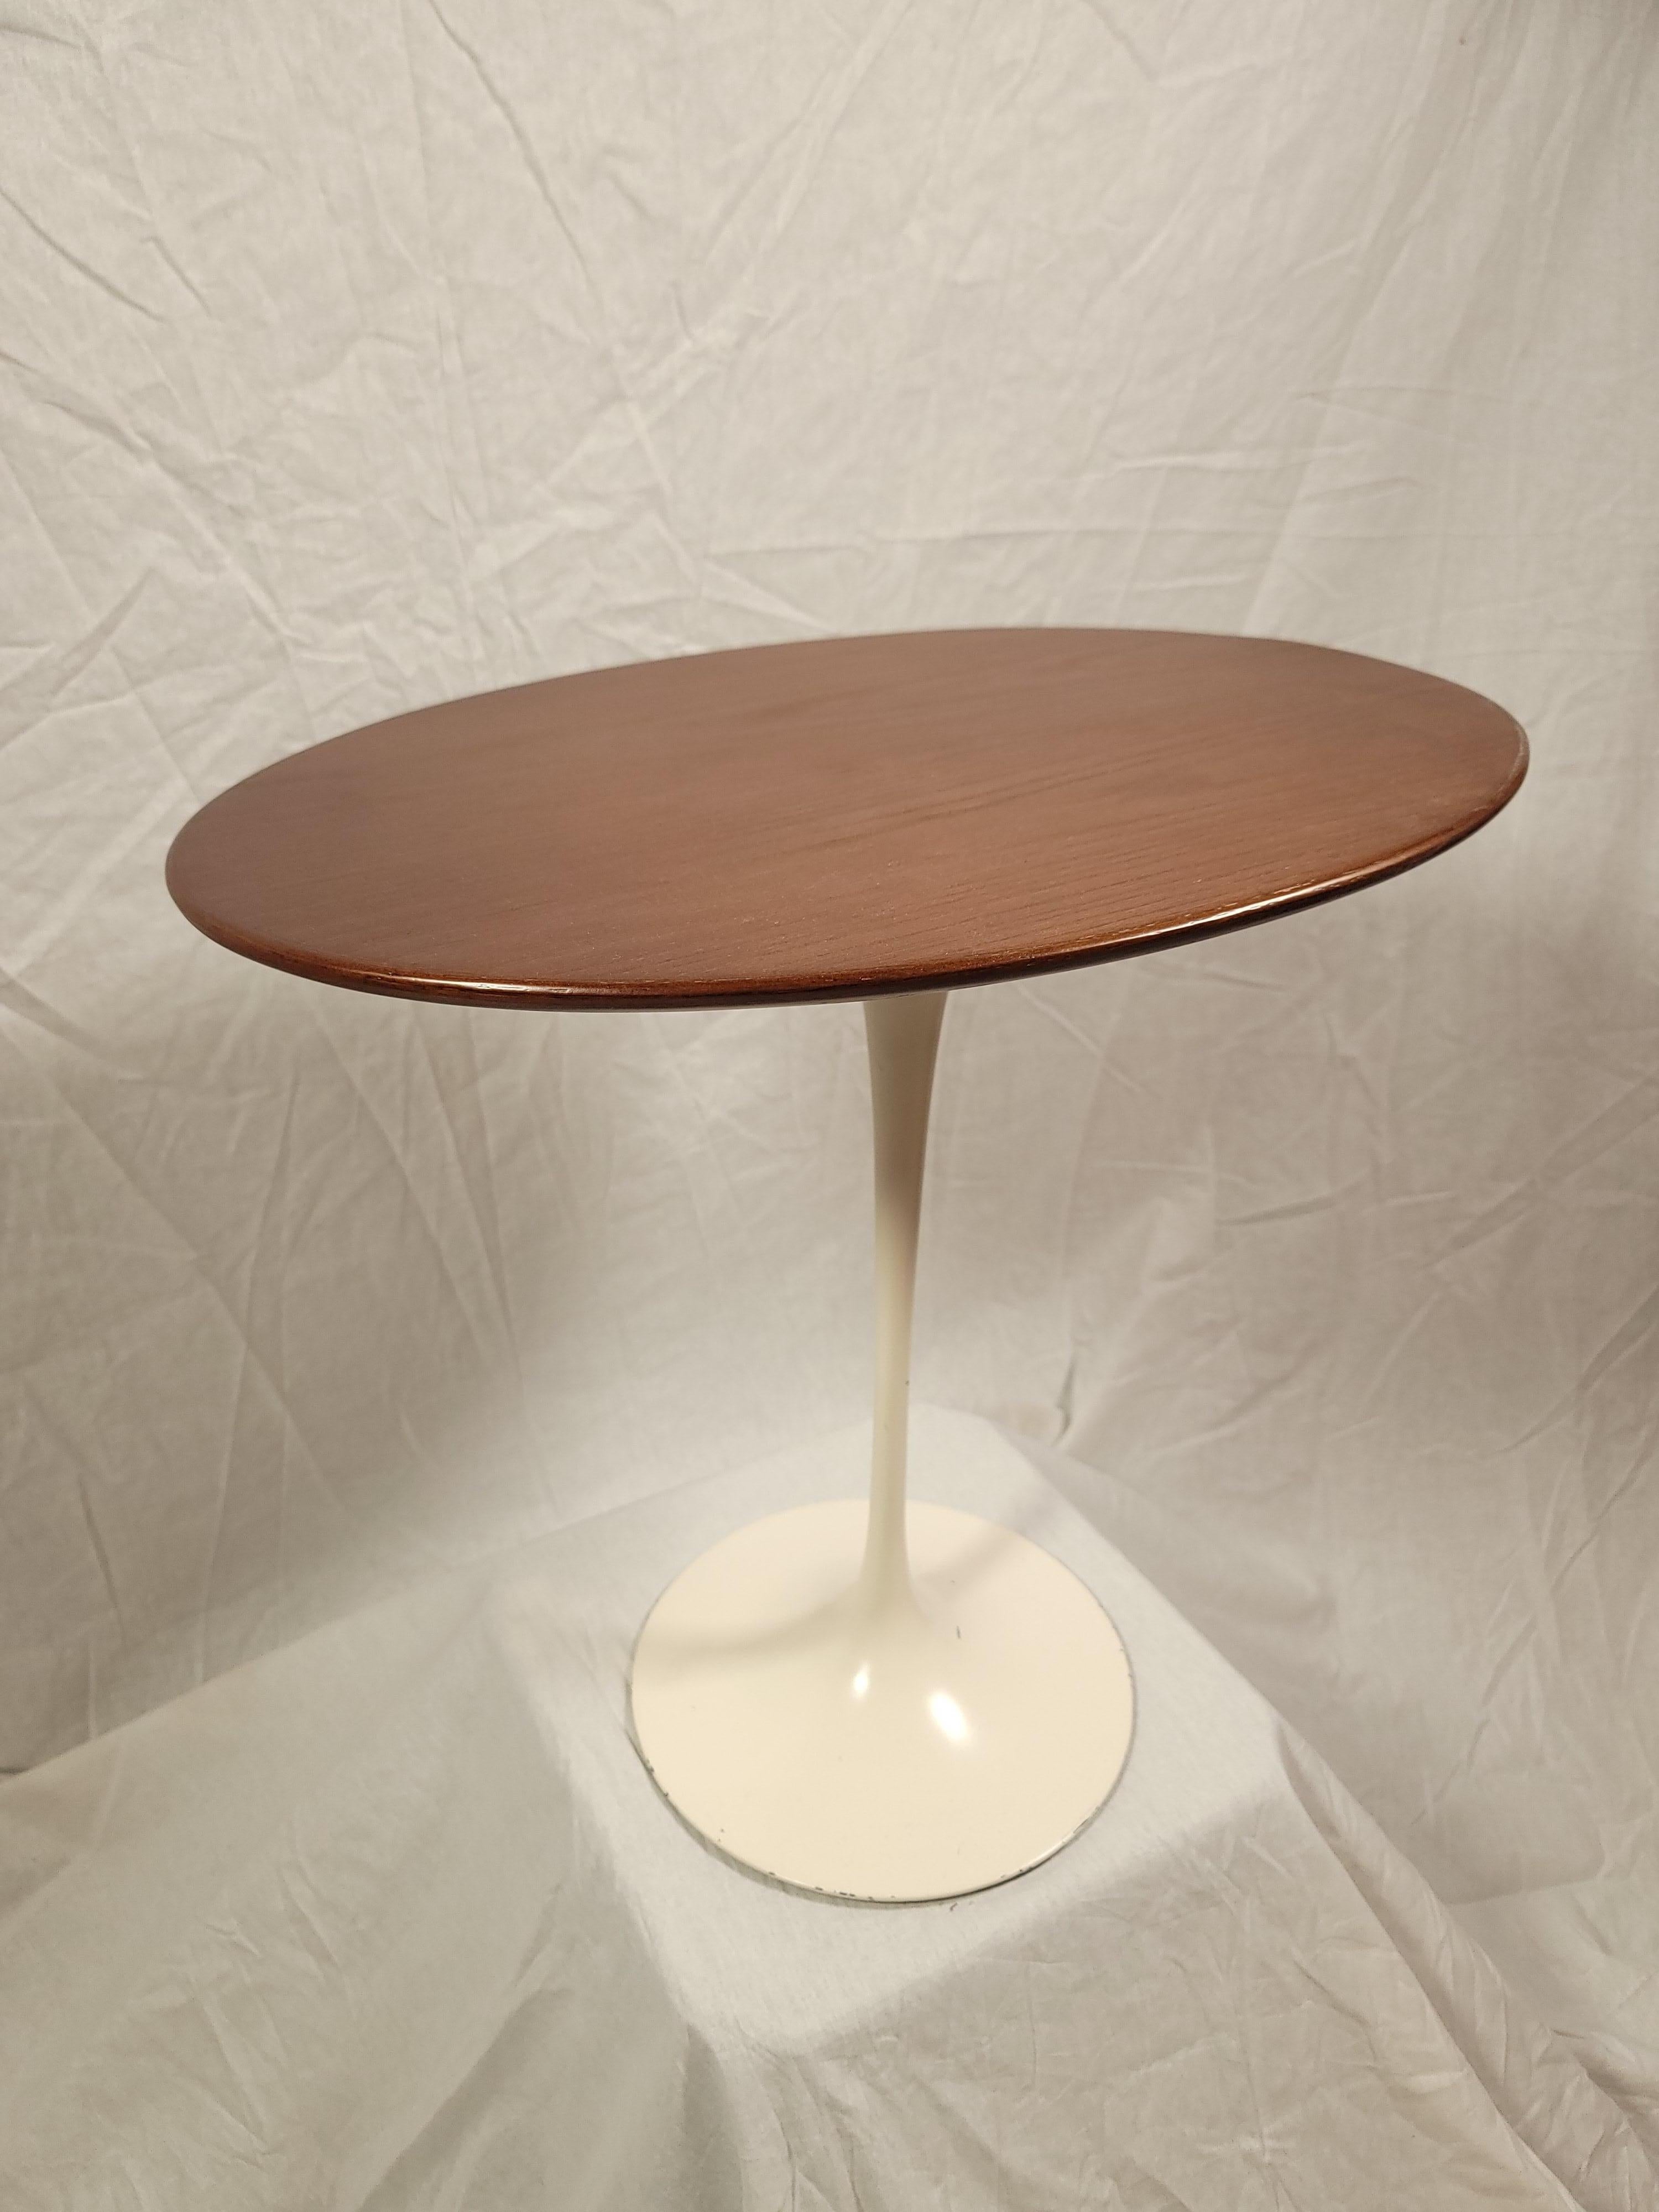 This Eero Saarinen Tulip Base side table was designed in 1957 and manufactured in 1978, delivered to a stationary store in Houston Texas based on the original label on the underside of the top.  At some point in it's life someone accidentally